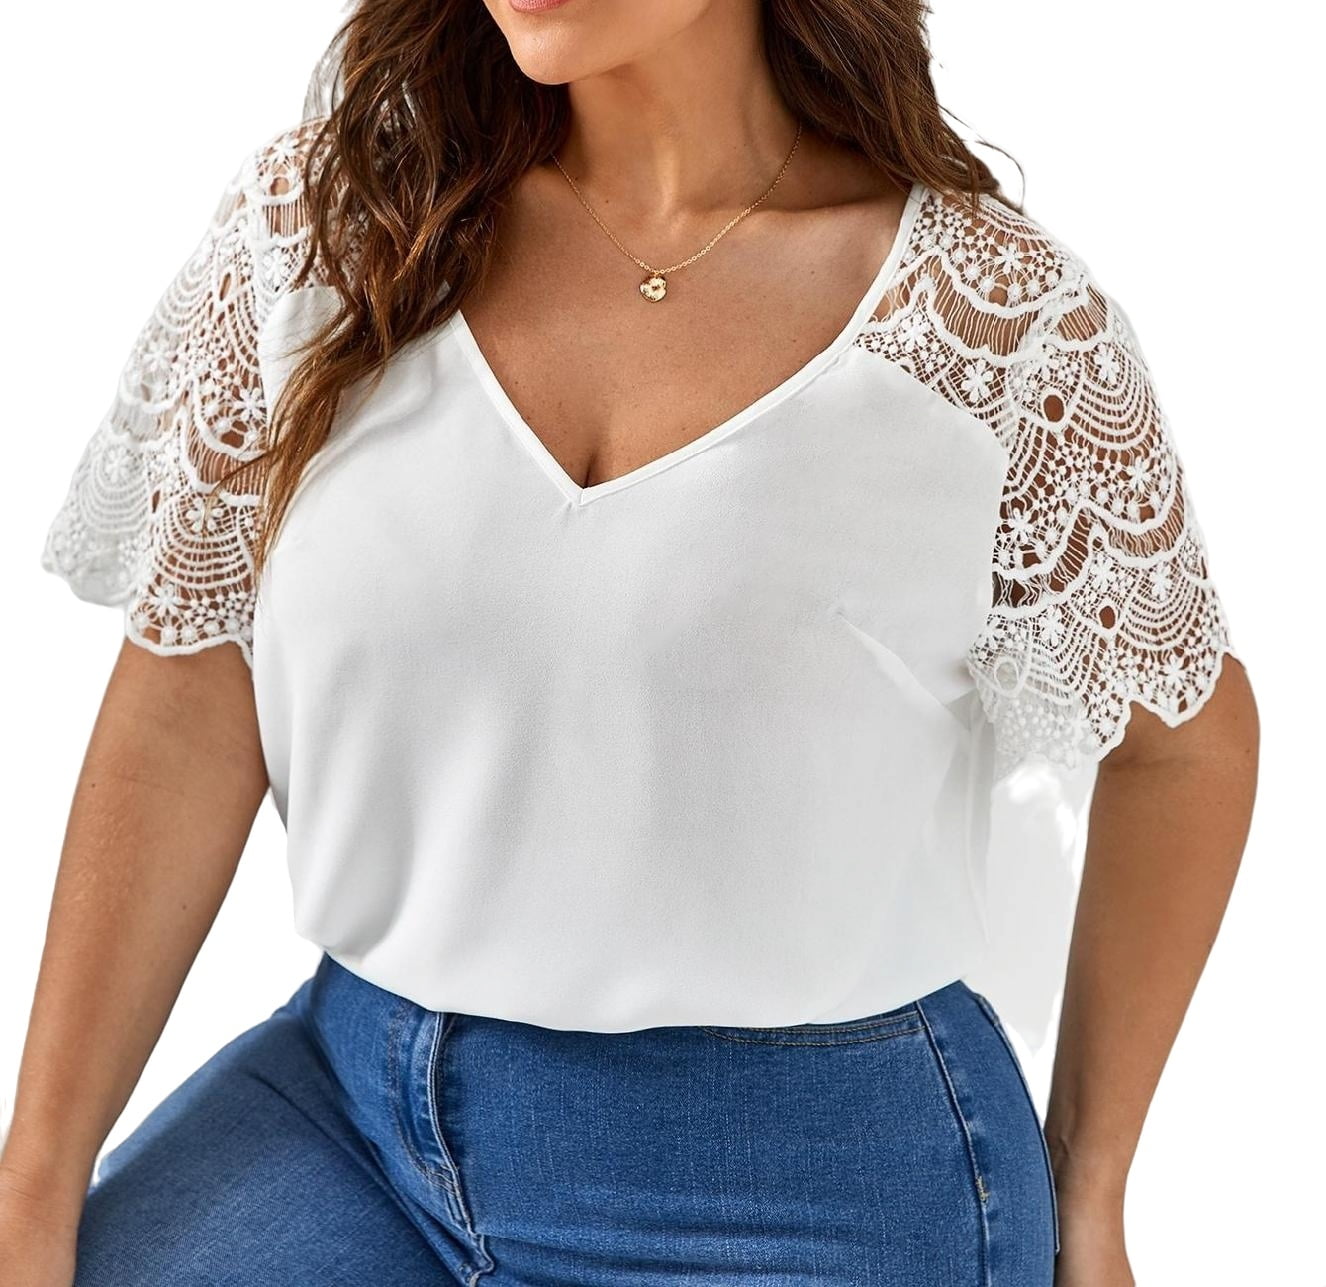 JWD Plus Size Tops For Women Summer Blouse Waffle Knit, 55% OFF